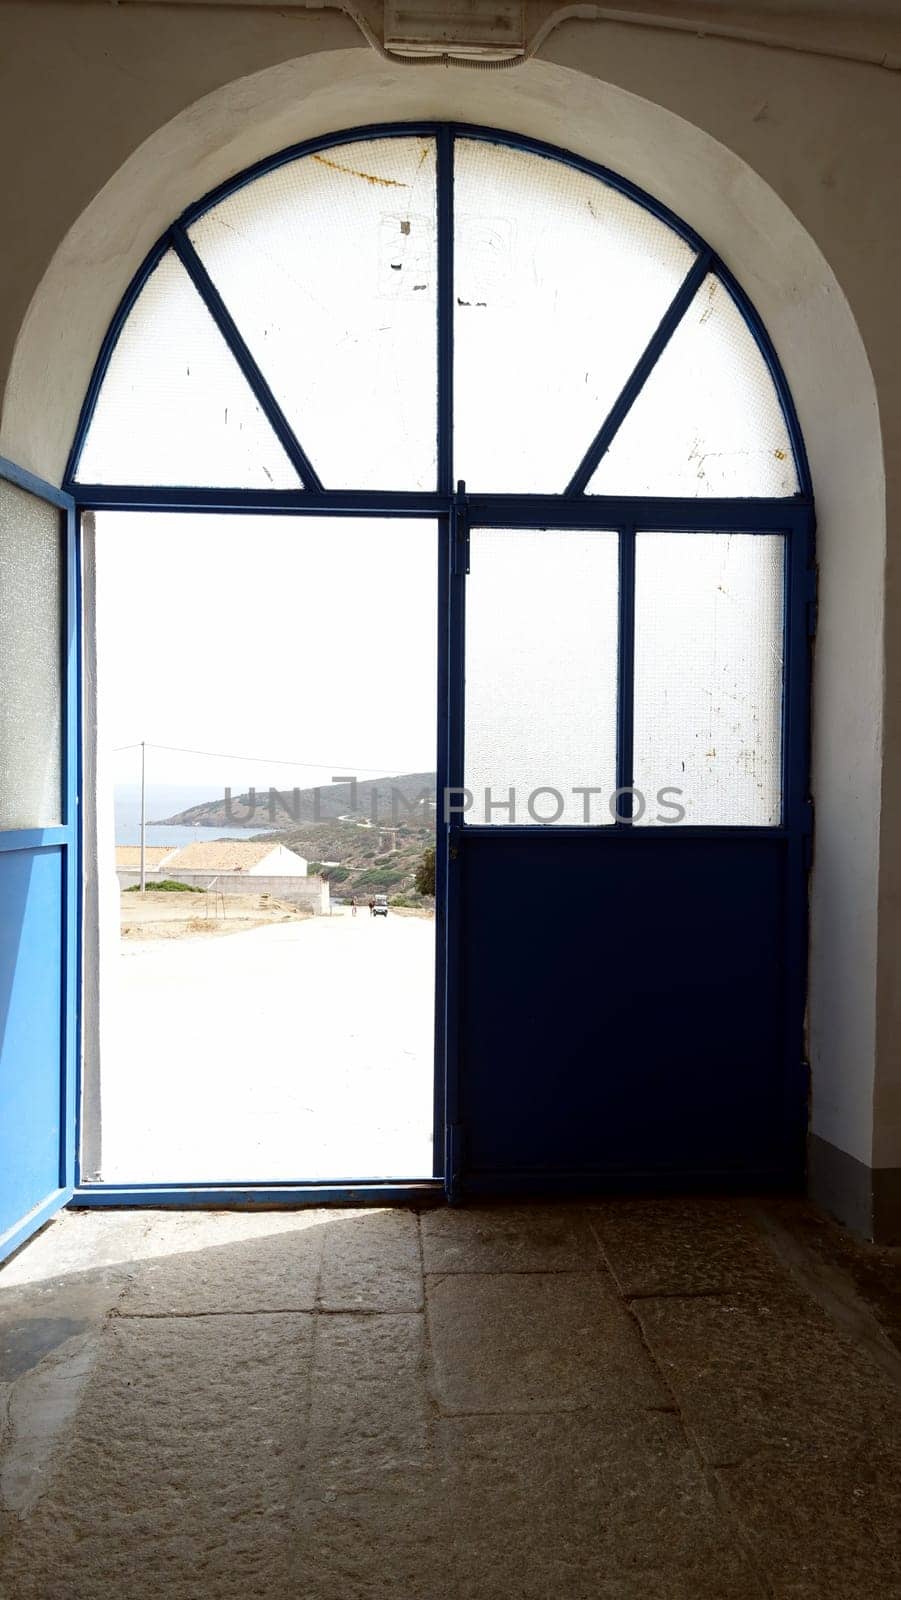 Asinara, Italy. August 11, 2021. The view of the sea from the door of the prison museum on the hill of the island.